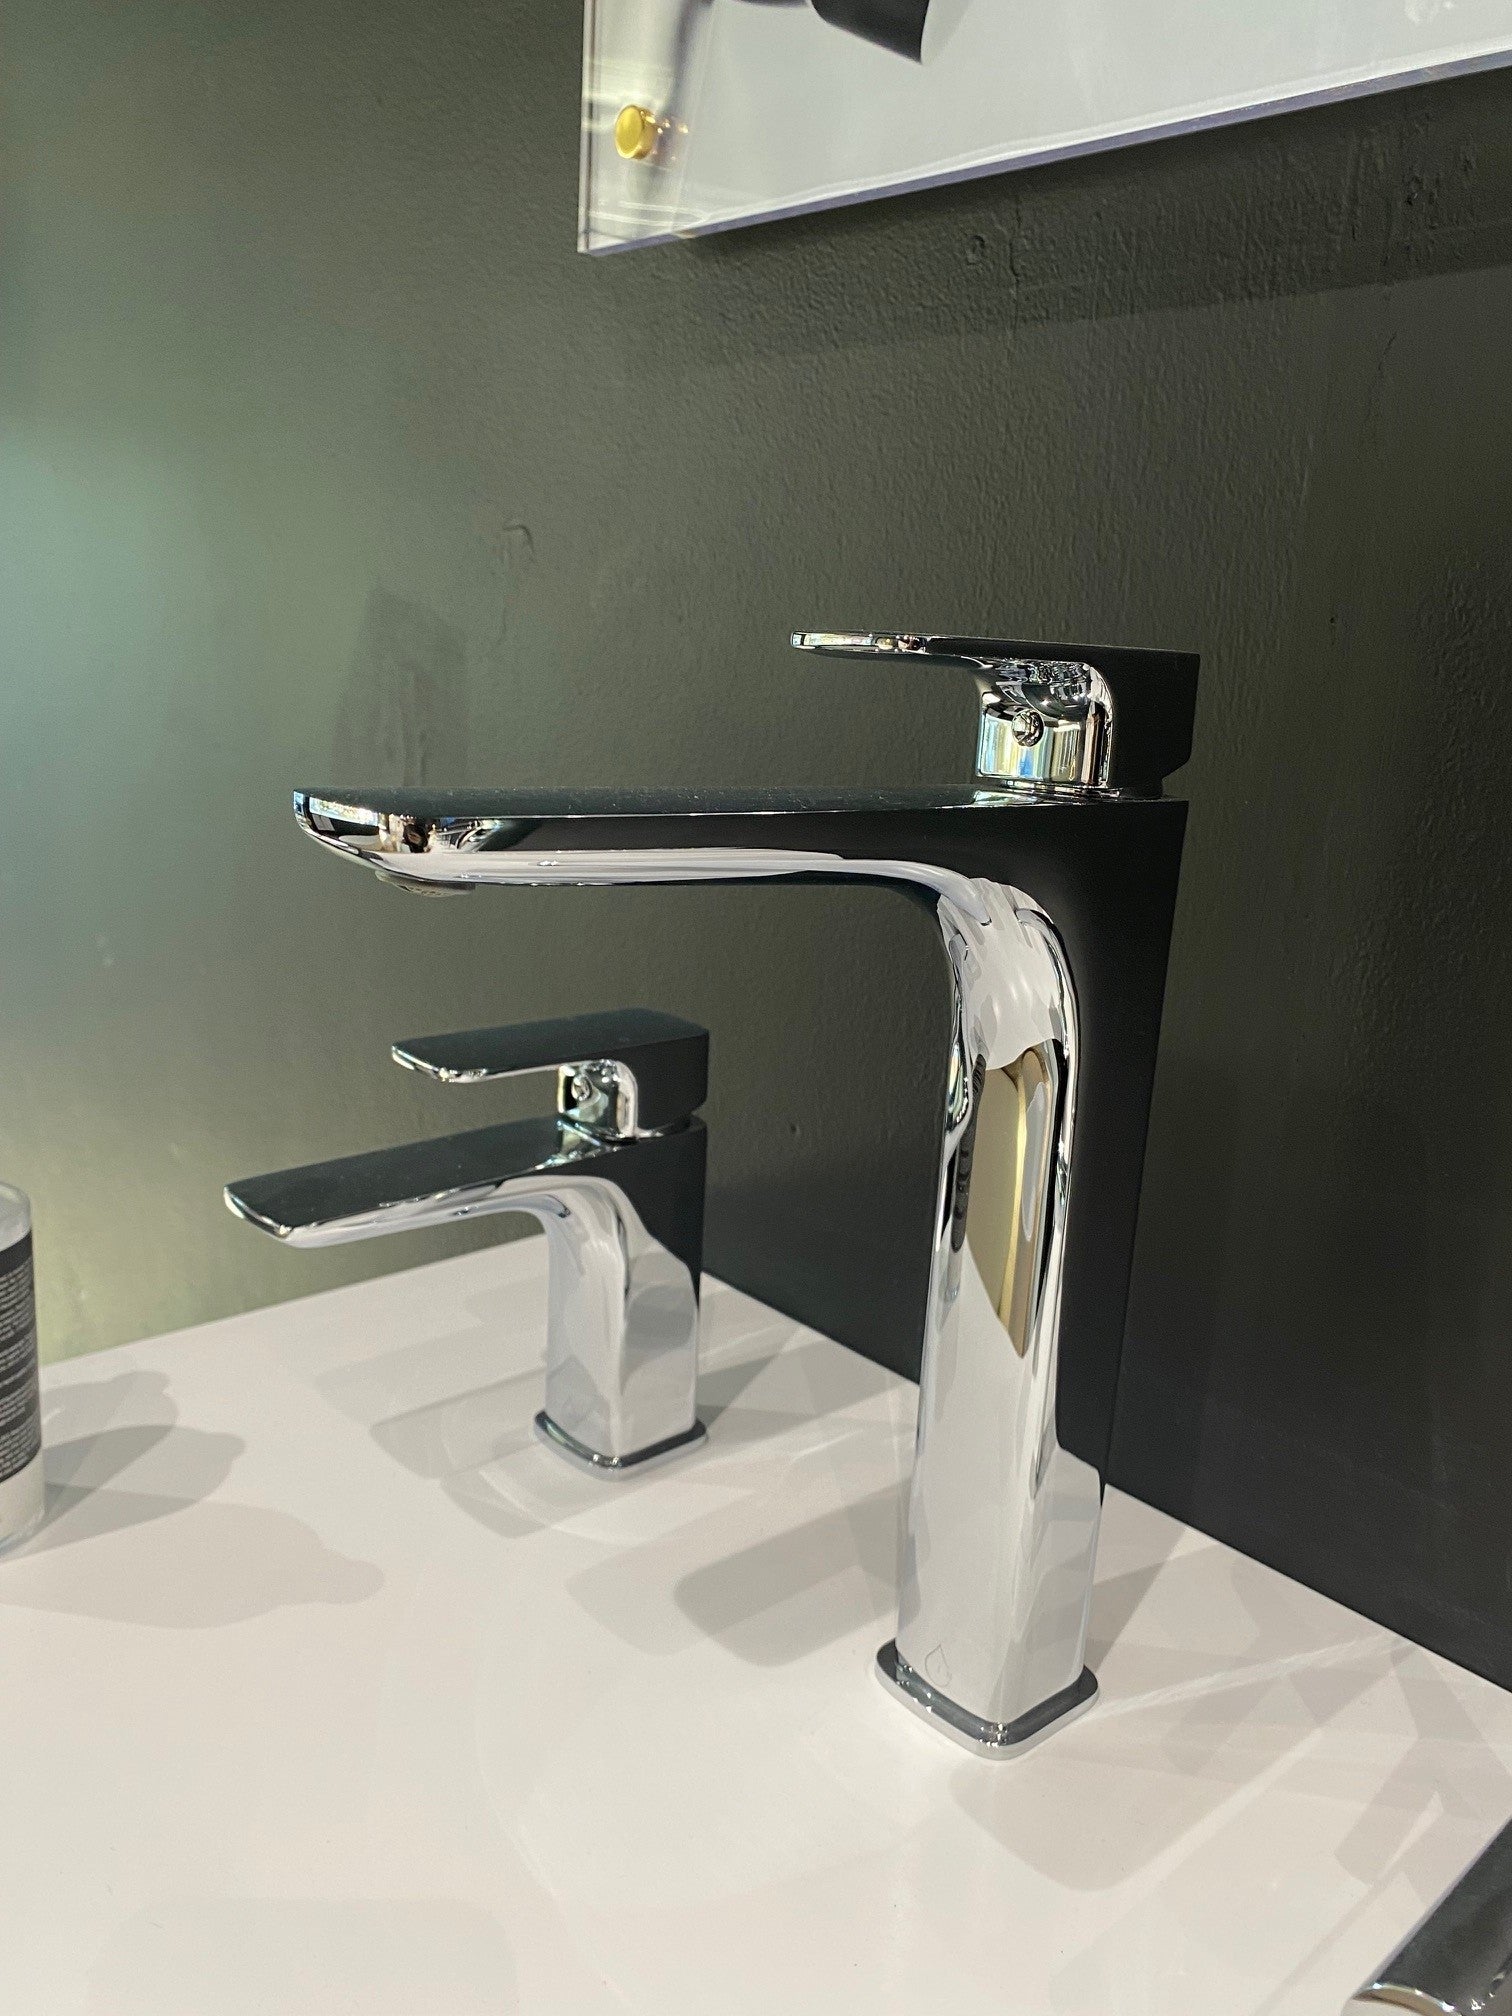 Ex-Display Balmoral Extended Basin Mixer in Chrome